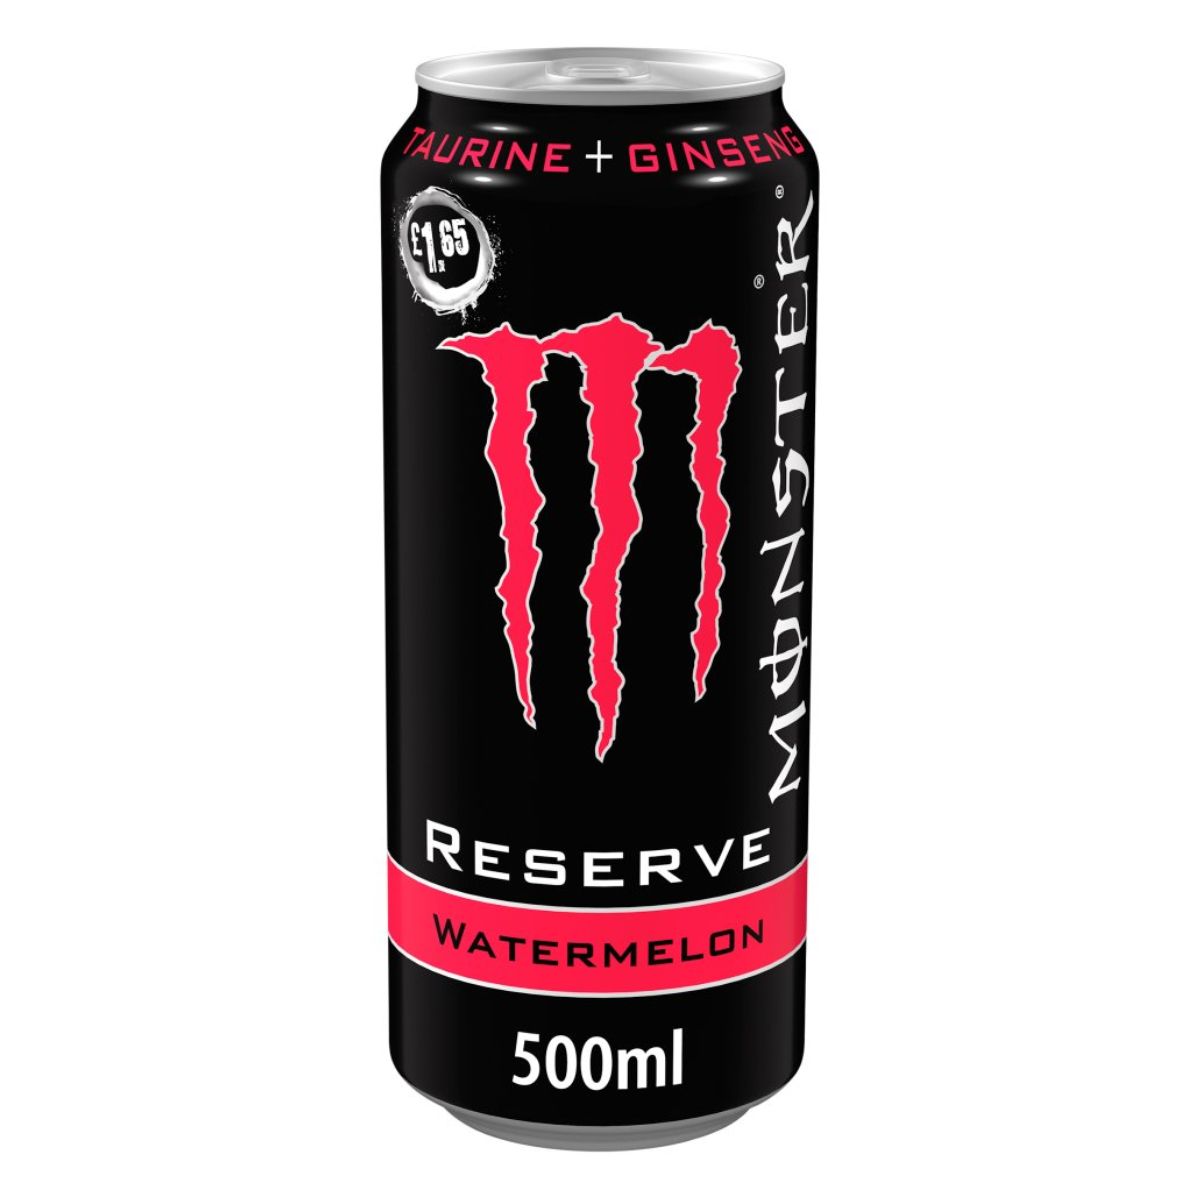 A Monster - Energy Drink Reserve Watermelon - 500ml with taurine and ginseng.